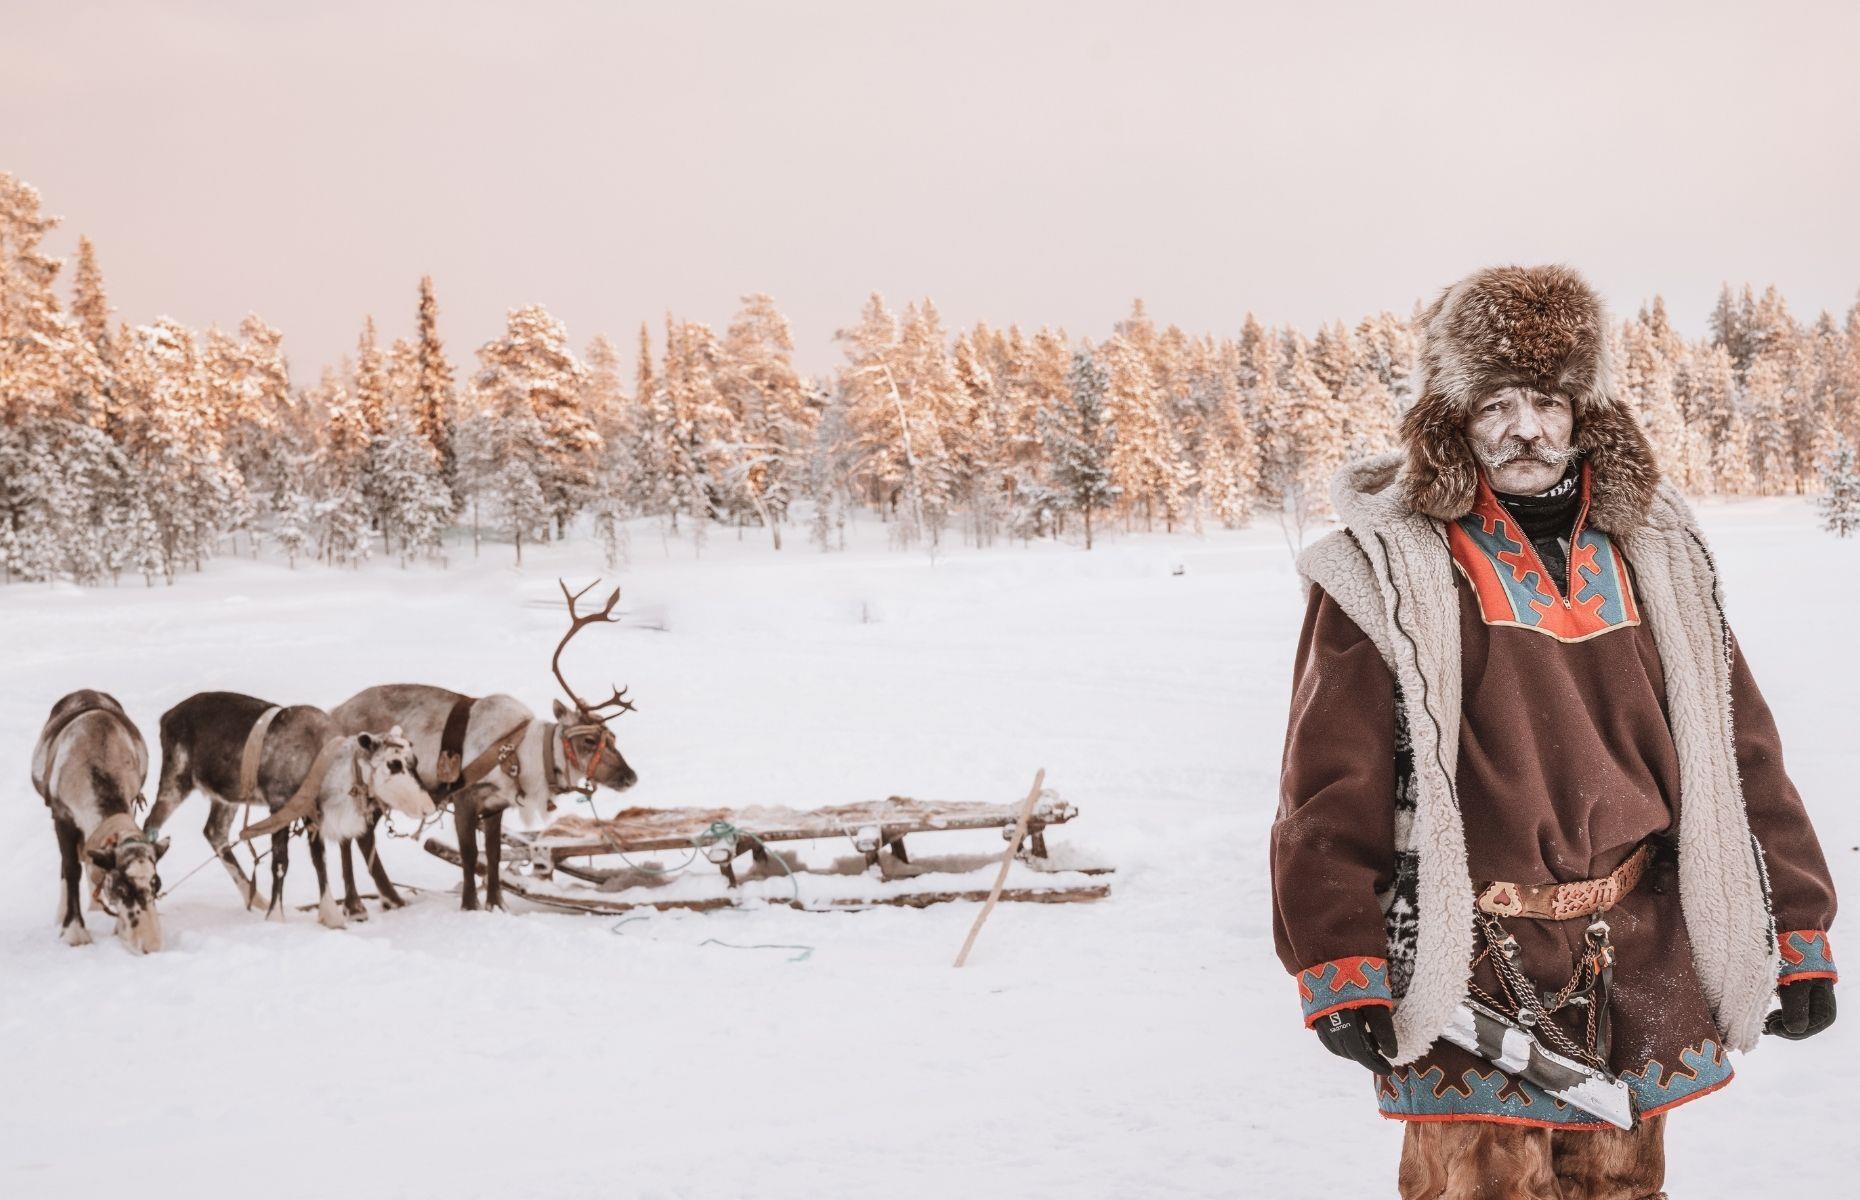 <p>Believed to have originated from northern Scandinavia, the Sámi people are indigenous to Lapland, Norway, as well as parts of Sweden, Finland and Russia. There's thought to be around 80,000 Sámi people in the world and their way of life is extremely unique. Historically reindeer herders, the Sámi would travel in groups around the Arctic, facing biting winds and frosts, in order to find food for their livestock. That is, until recently.</p>  <p><strong><a href="https://www.loveexploring.com/galleries/95385/secrets-of-the-worlds-most-remote-oceans-revealed">Take a look at secrets of the world's most remote oceans</a></strong></p>